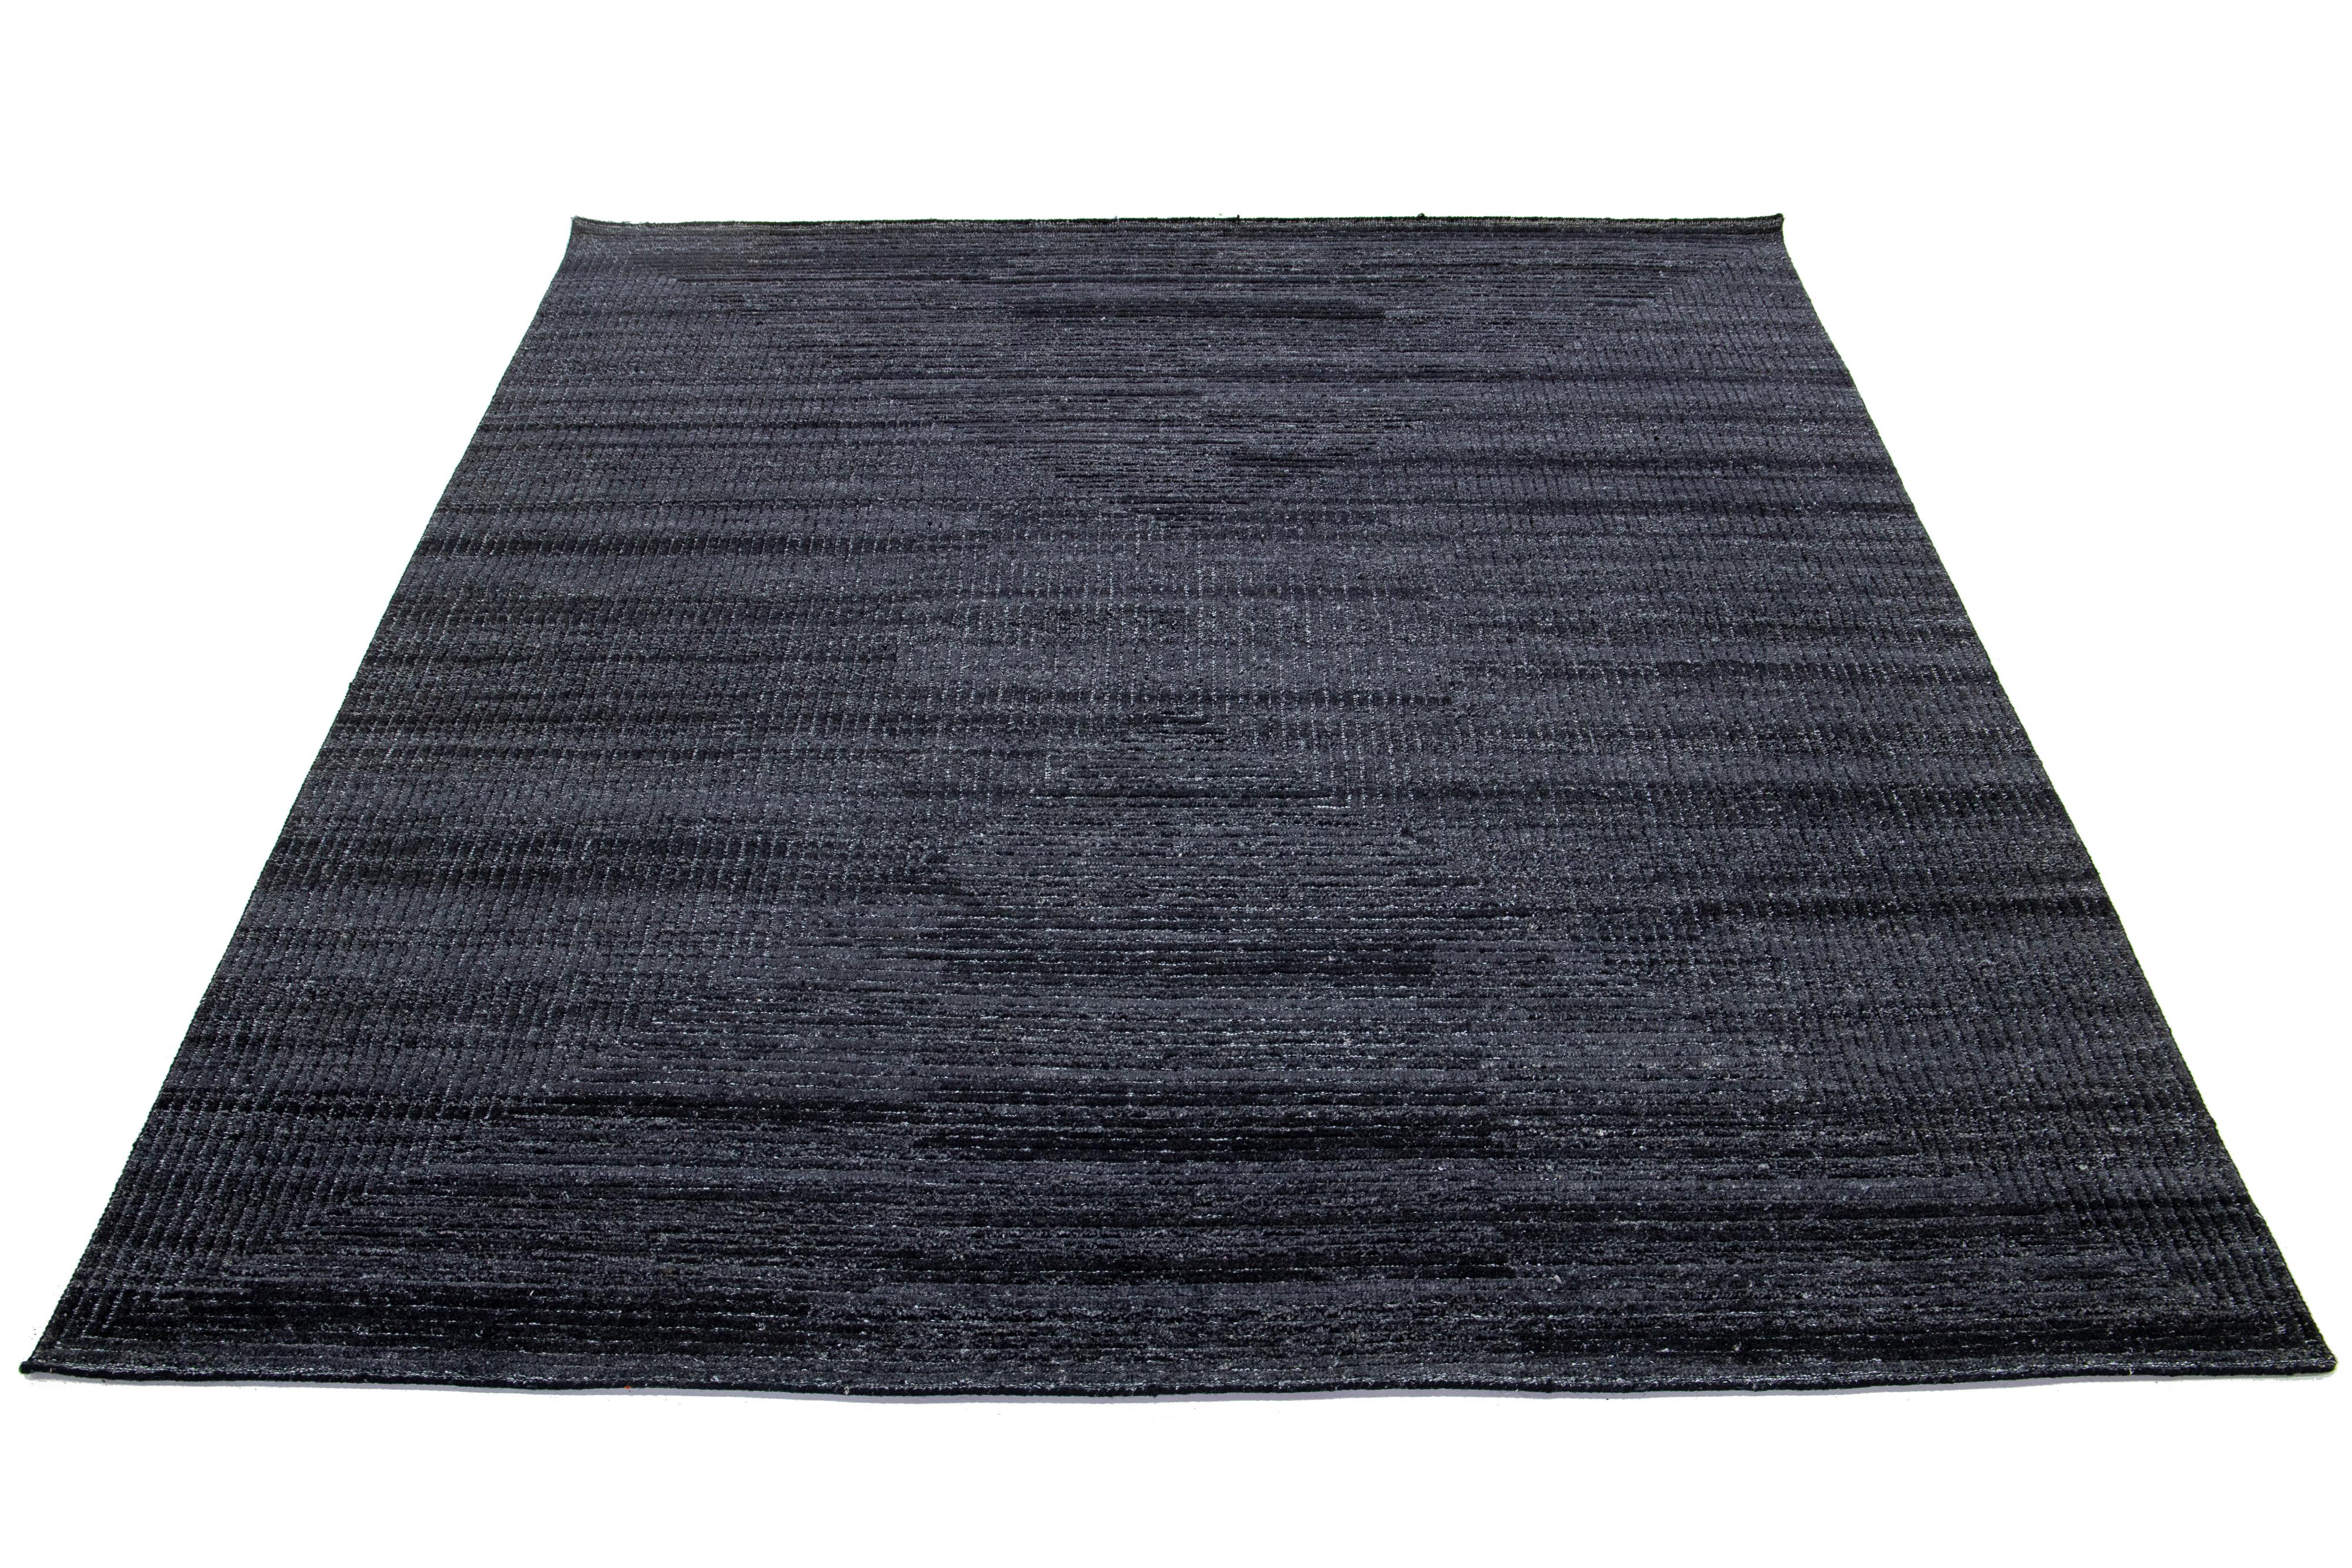 This handmade Moroccan wool rug showcases an Organic Modern style with a geometric design in shades of charcoal gray.

This rug measures 8'1